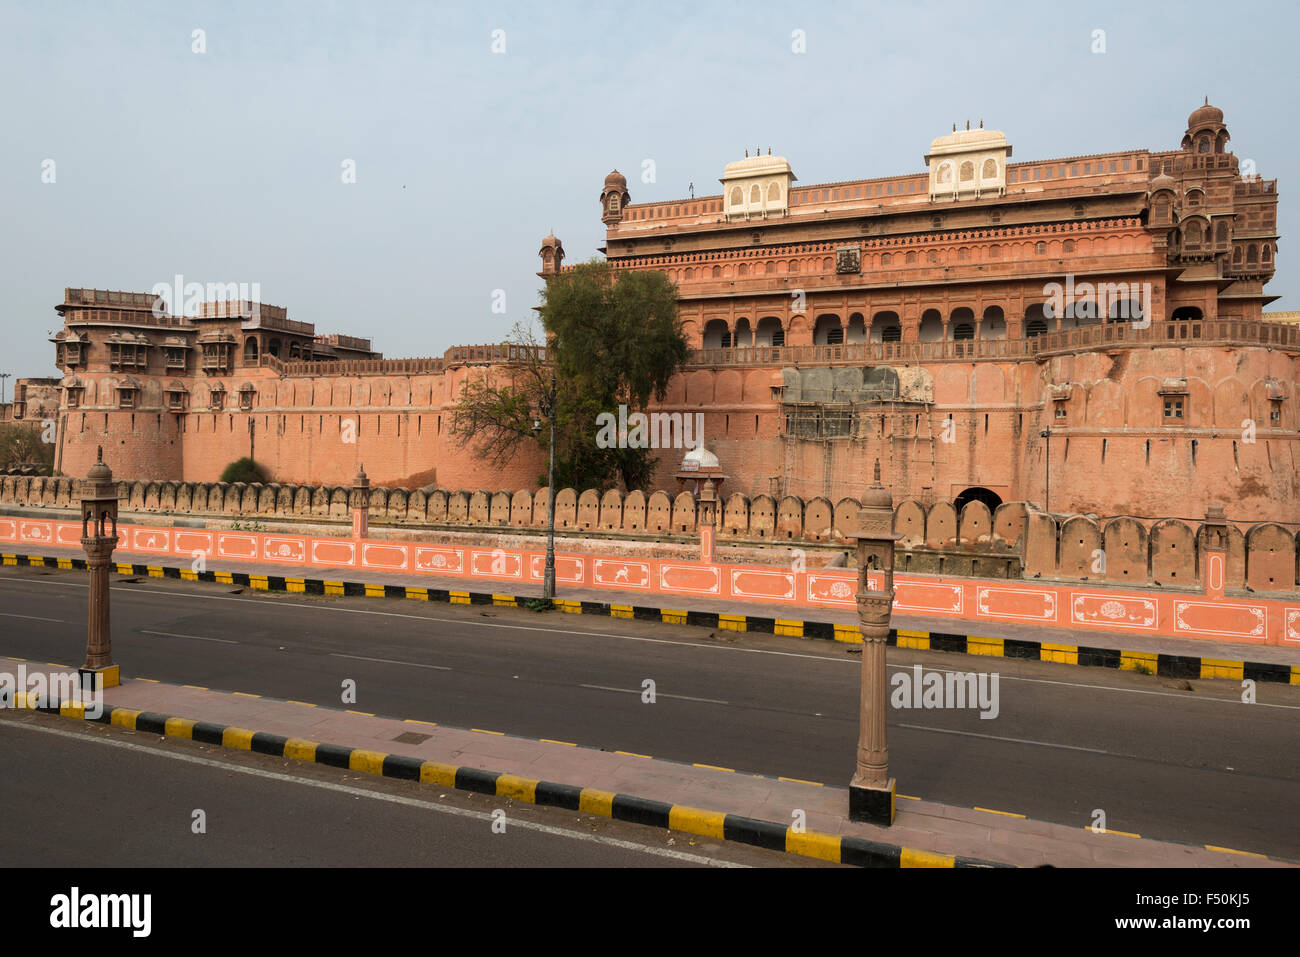 Junagarh Fort, originally called Chintamani, was built in 16th century and is one of the main tourist attractions today Stock Photo